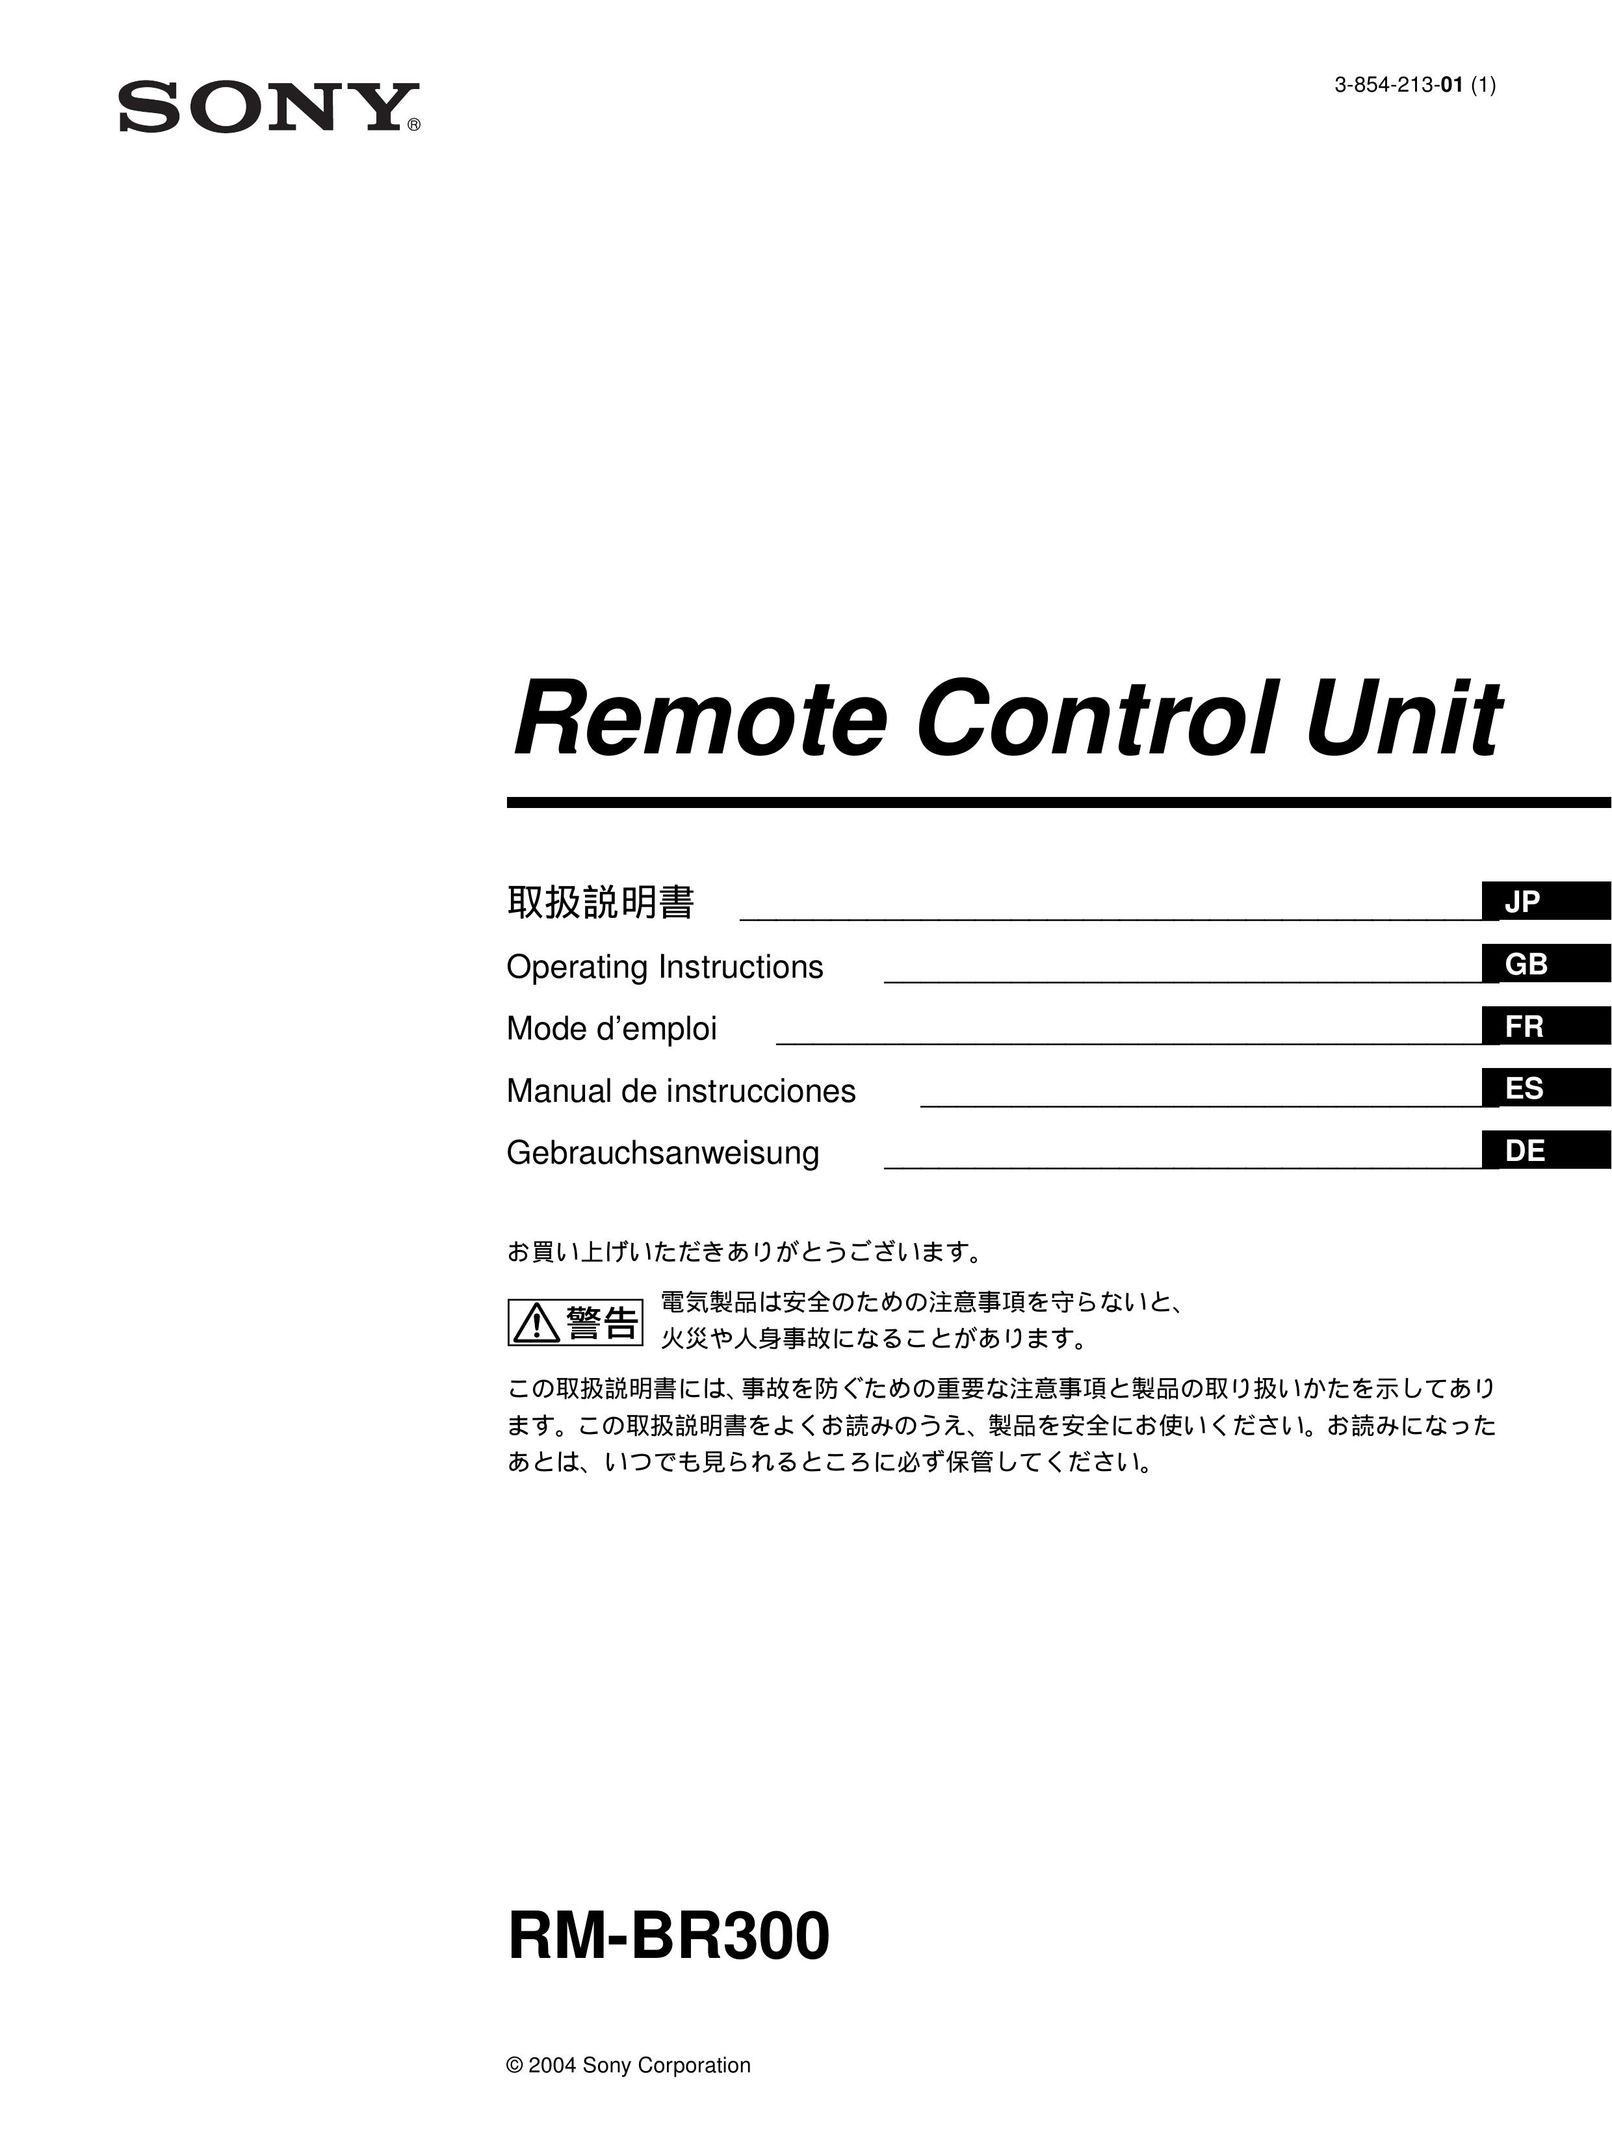 Sony RM-BR300 Universal Remote User Manual